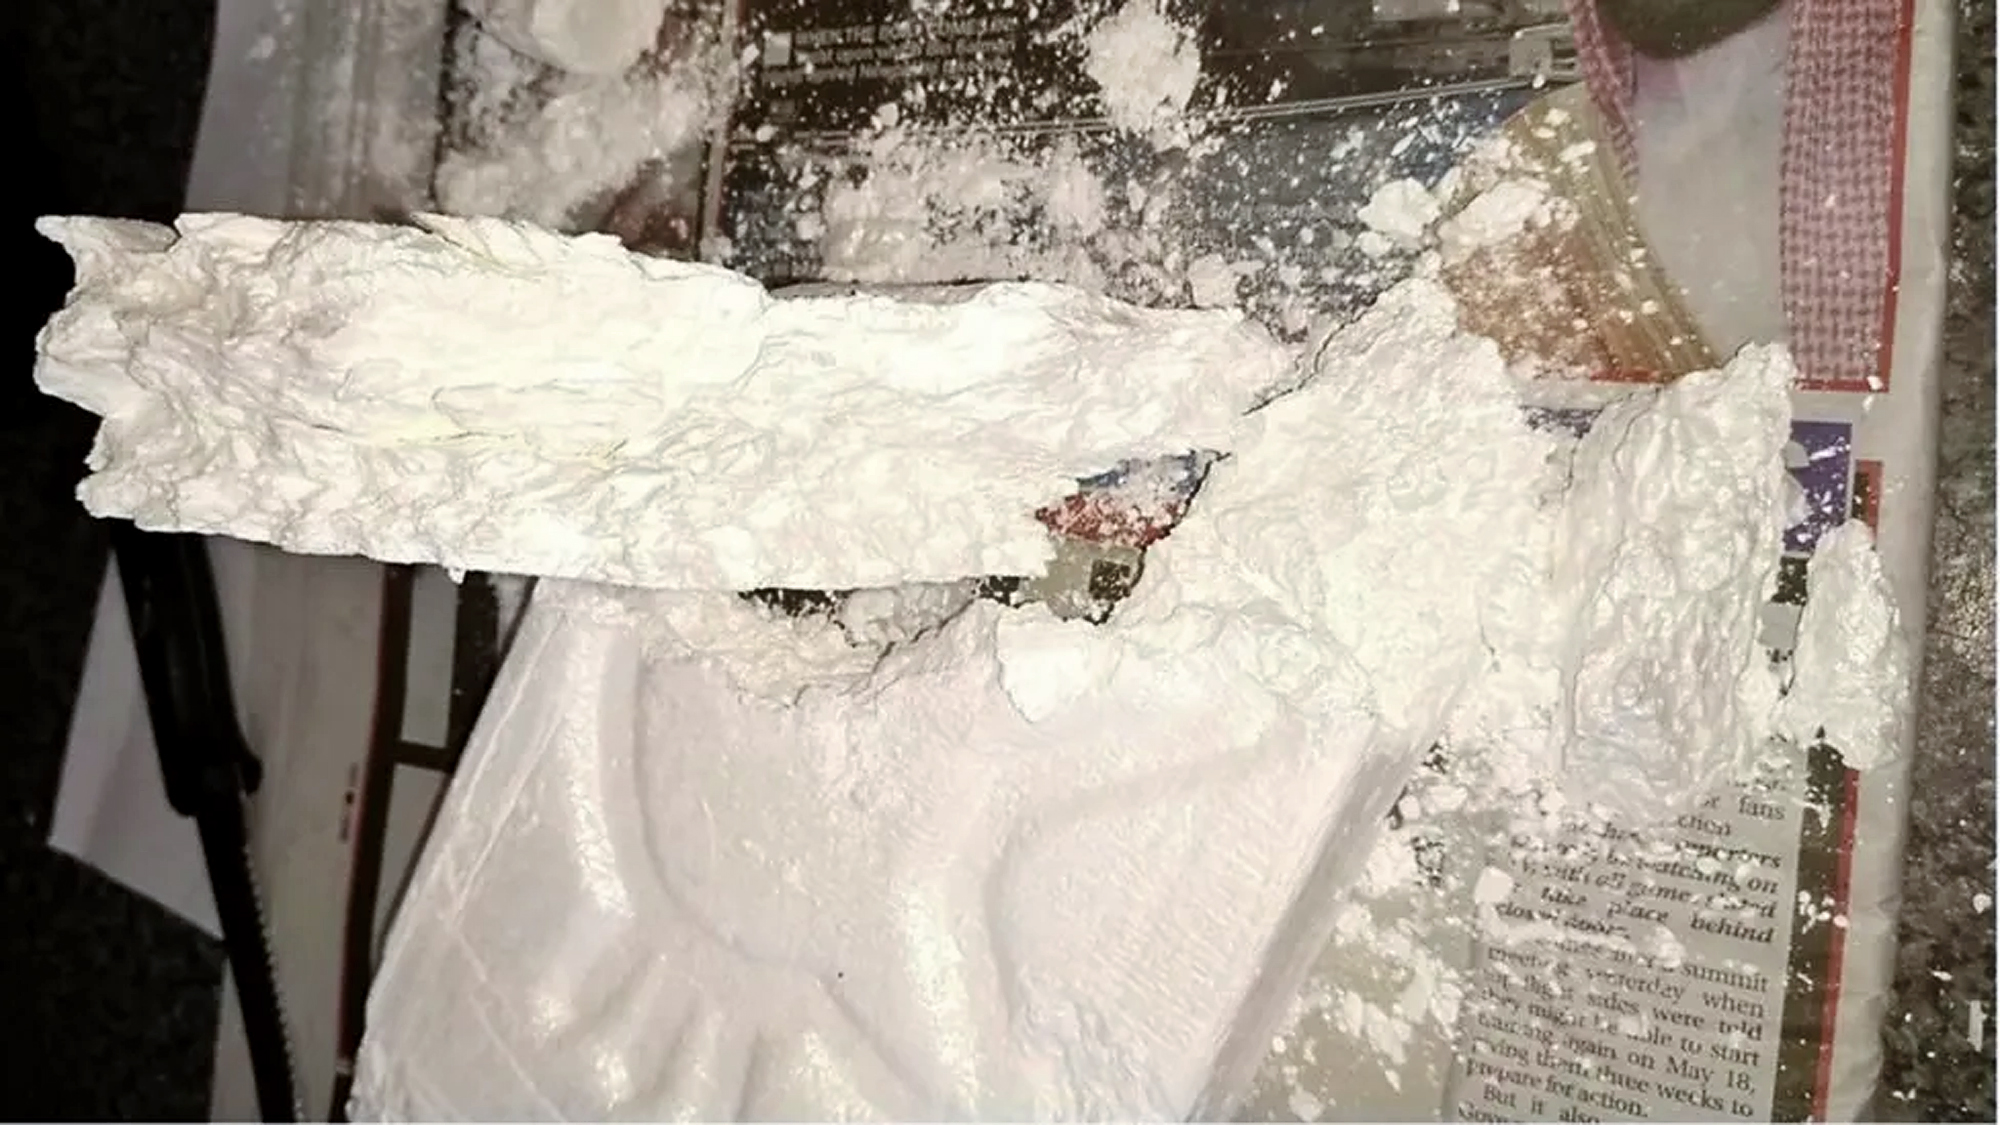 Large quantities of Class A and B drugs, including cocaine, were seized in Operation Eternal